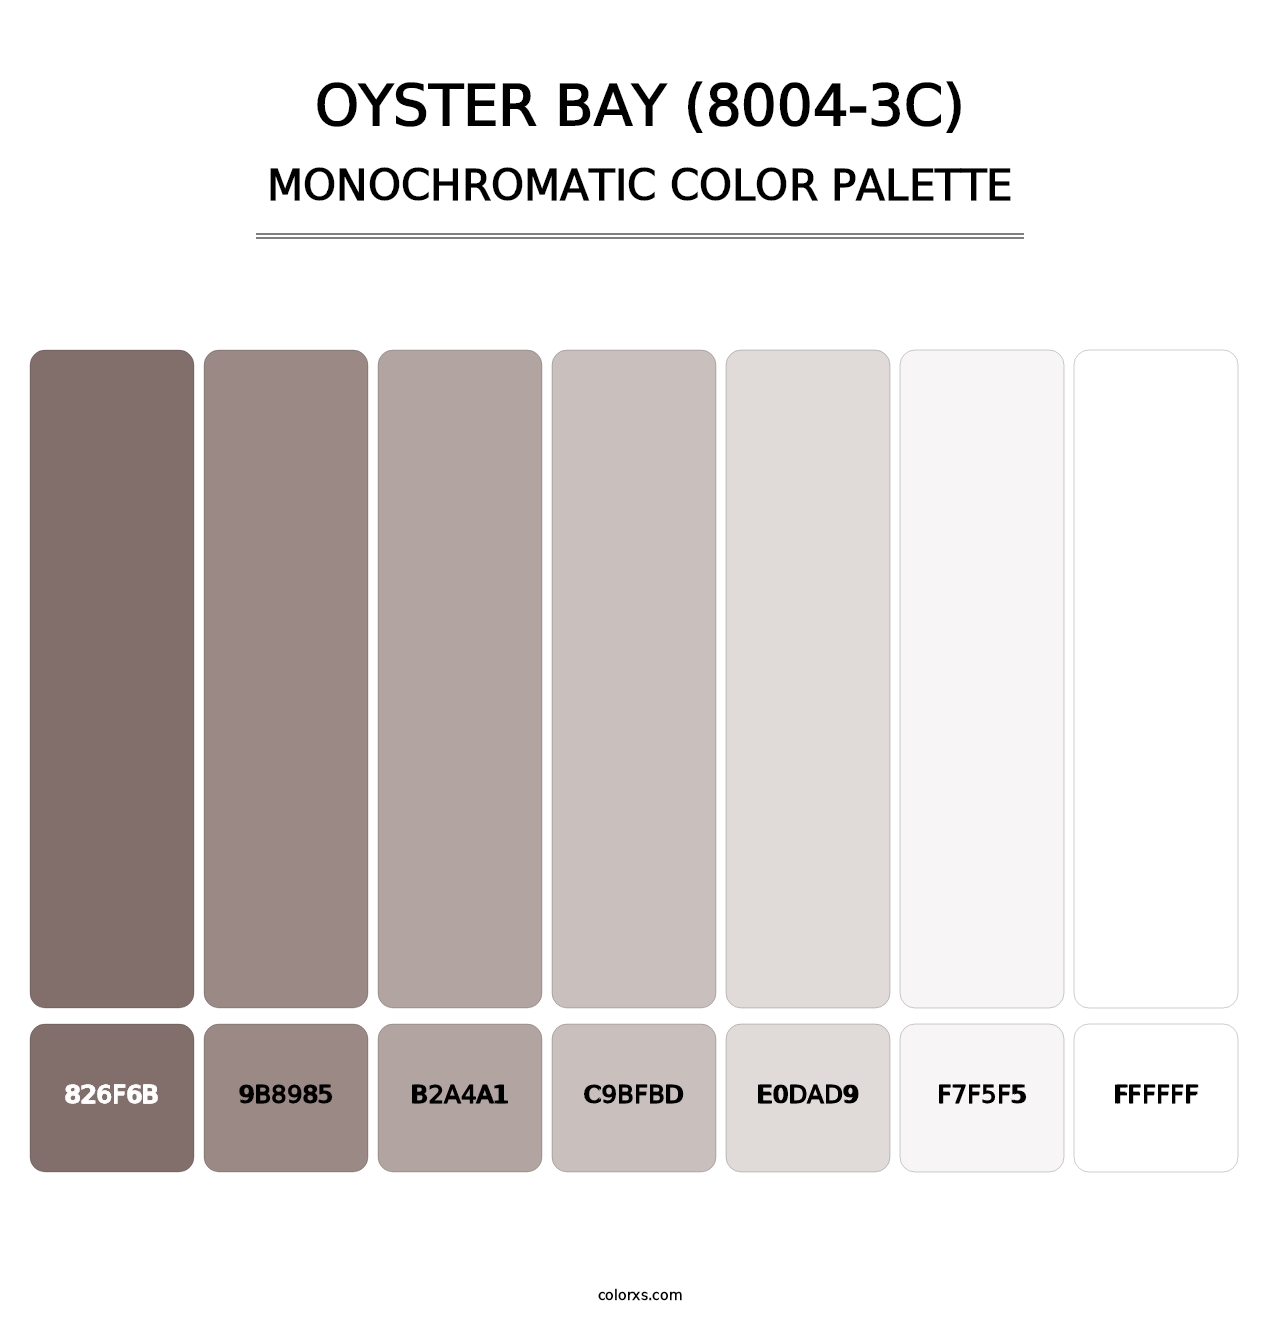 Oyster Bay (8004-3C) - Monochromatic Color Palette